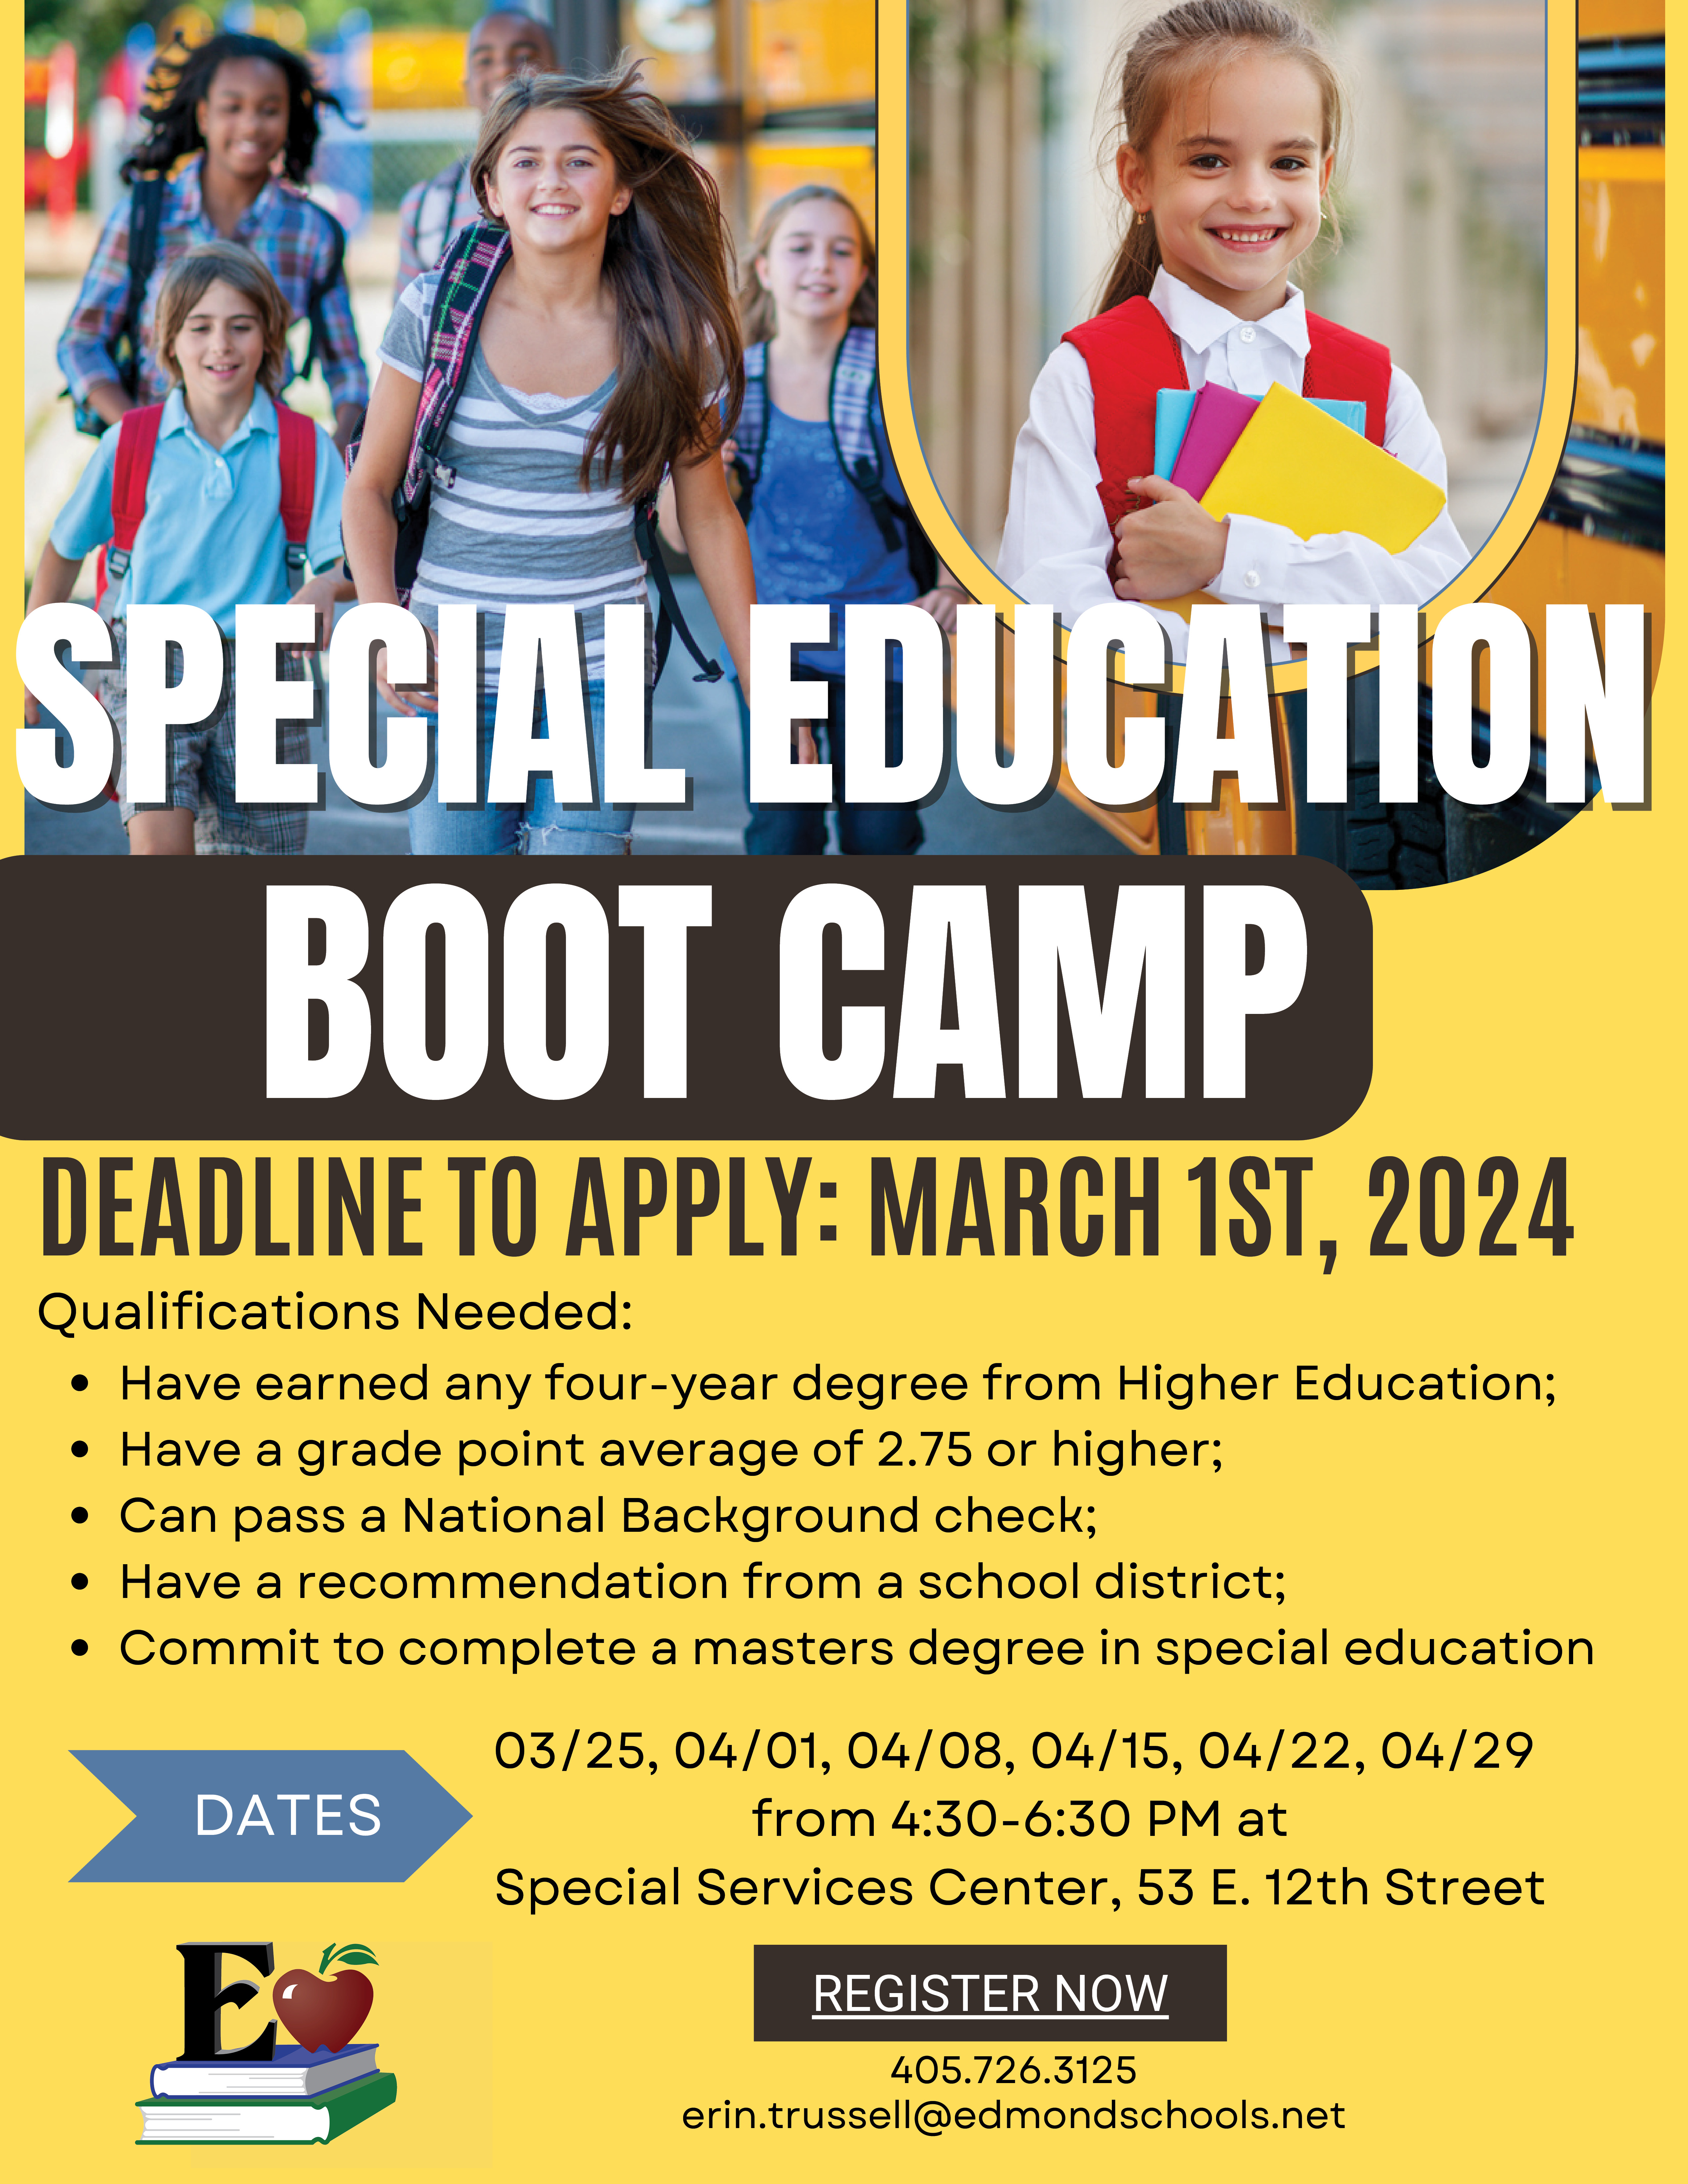 DATES DEADLINE TO APPLY: MARCH 1ST, 2024 SPECIAL EDUCATION BOOT CAMP Qualifications Needed: Have earned any four-year degree from Higher Education; Have a grade point average of 2.75 or higher; Can pass a National Background check; Have a recommendation from a school district; Commit to complete a masters degree in special education 405.726.3125 erin.trussell@edmondschools.net